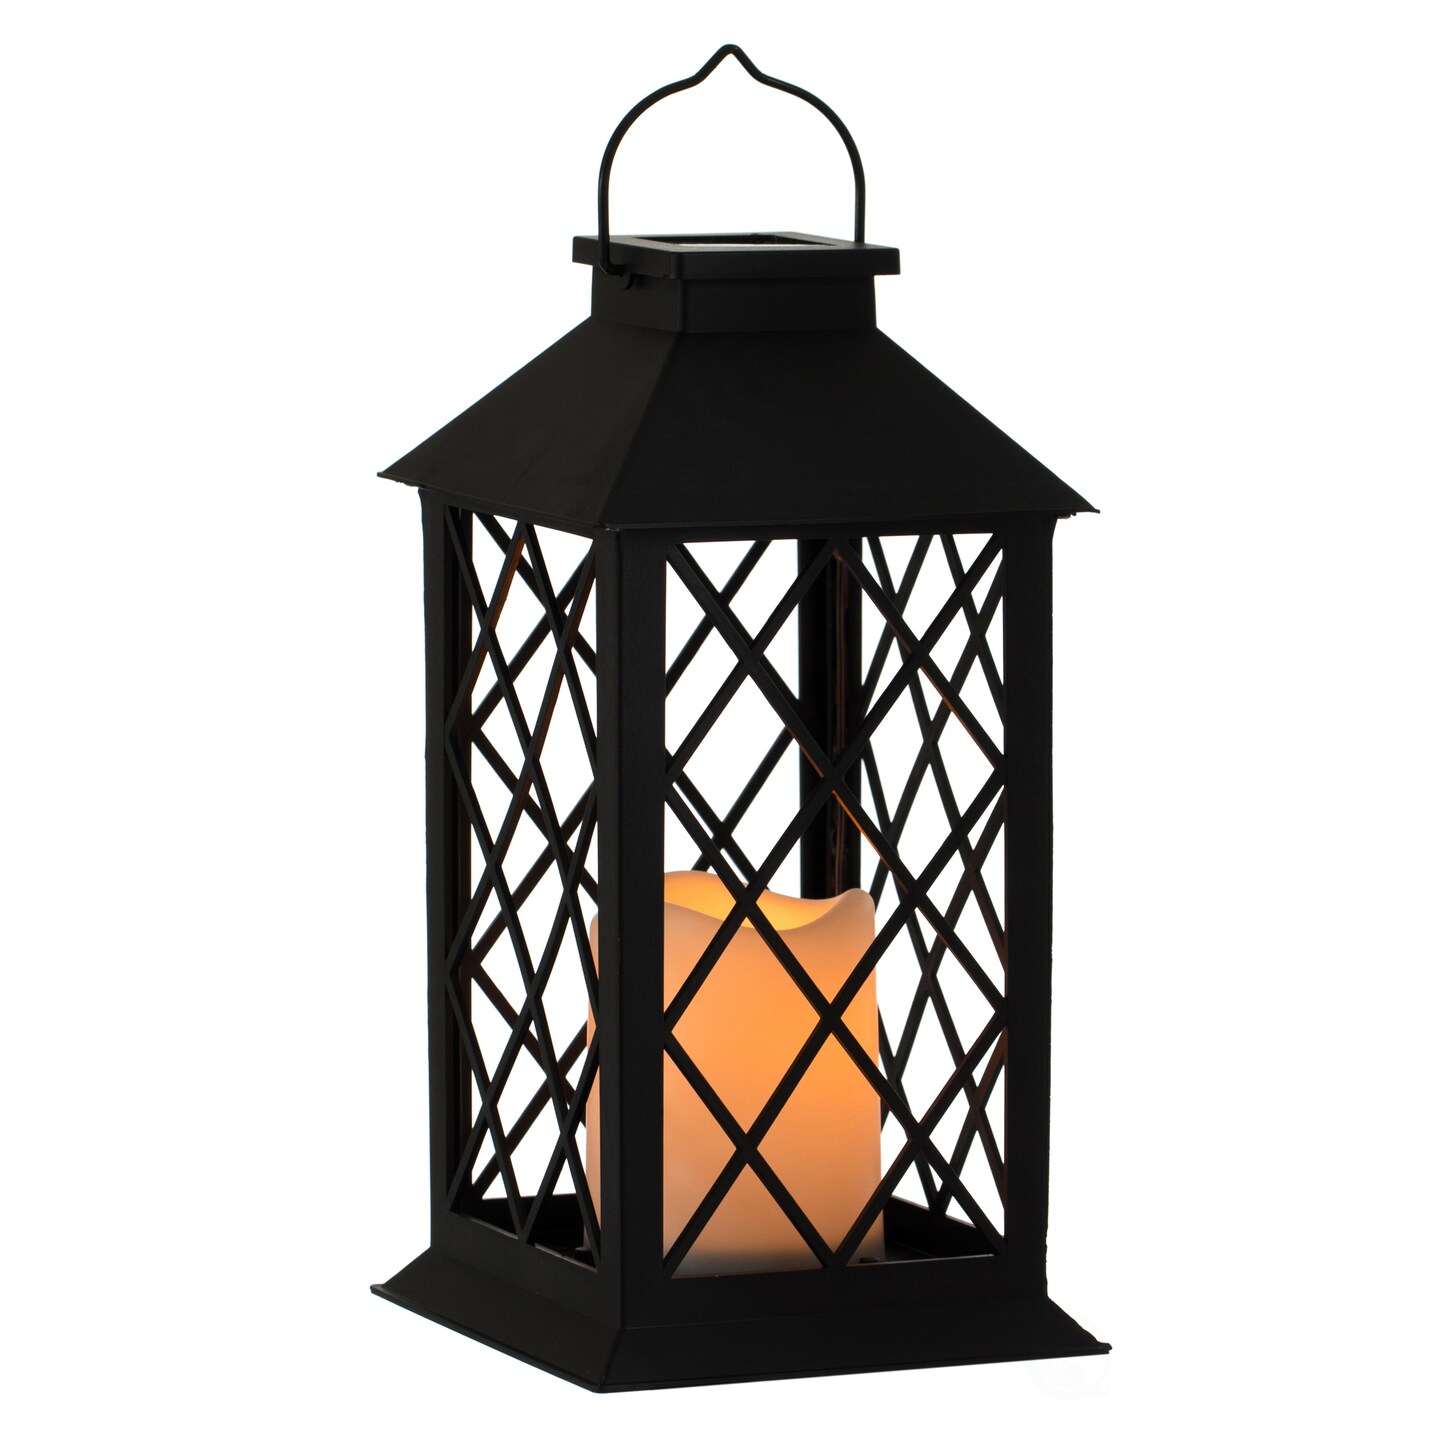 Gardenised Decorative Garden Patio Hanging LED Candle Lantern for Outdoors Table Lawn and Deck